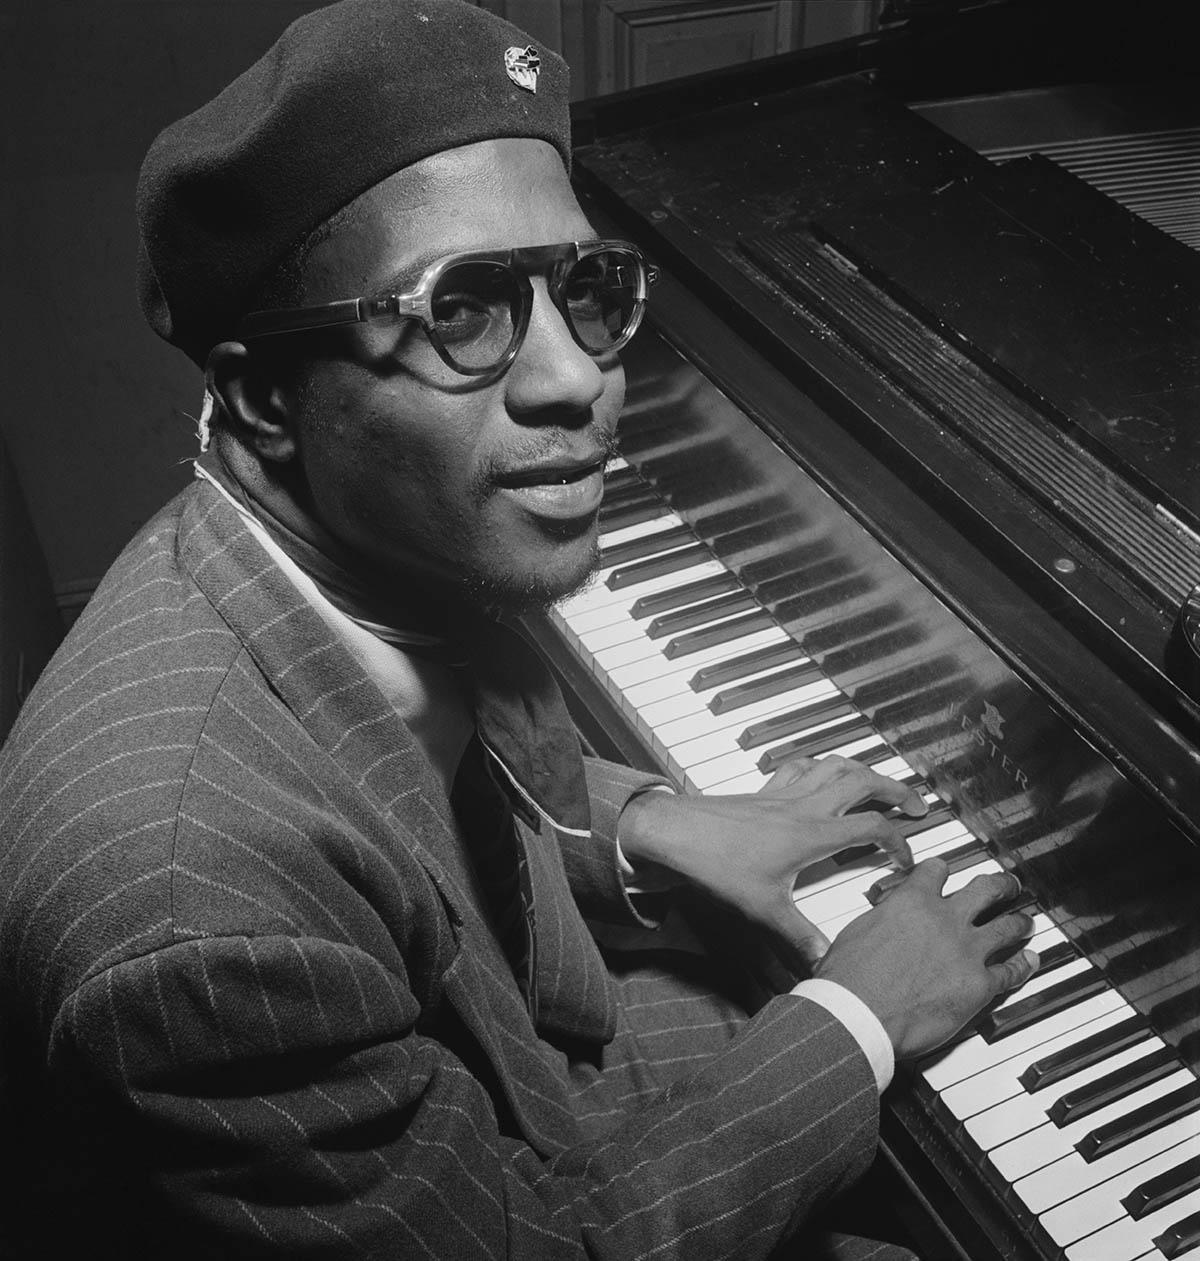 Photo by Thelonious Monk